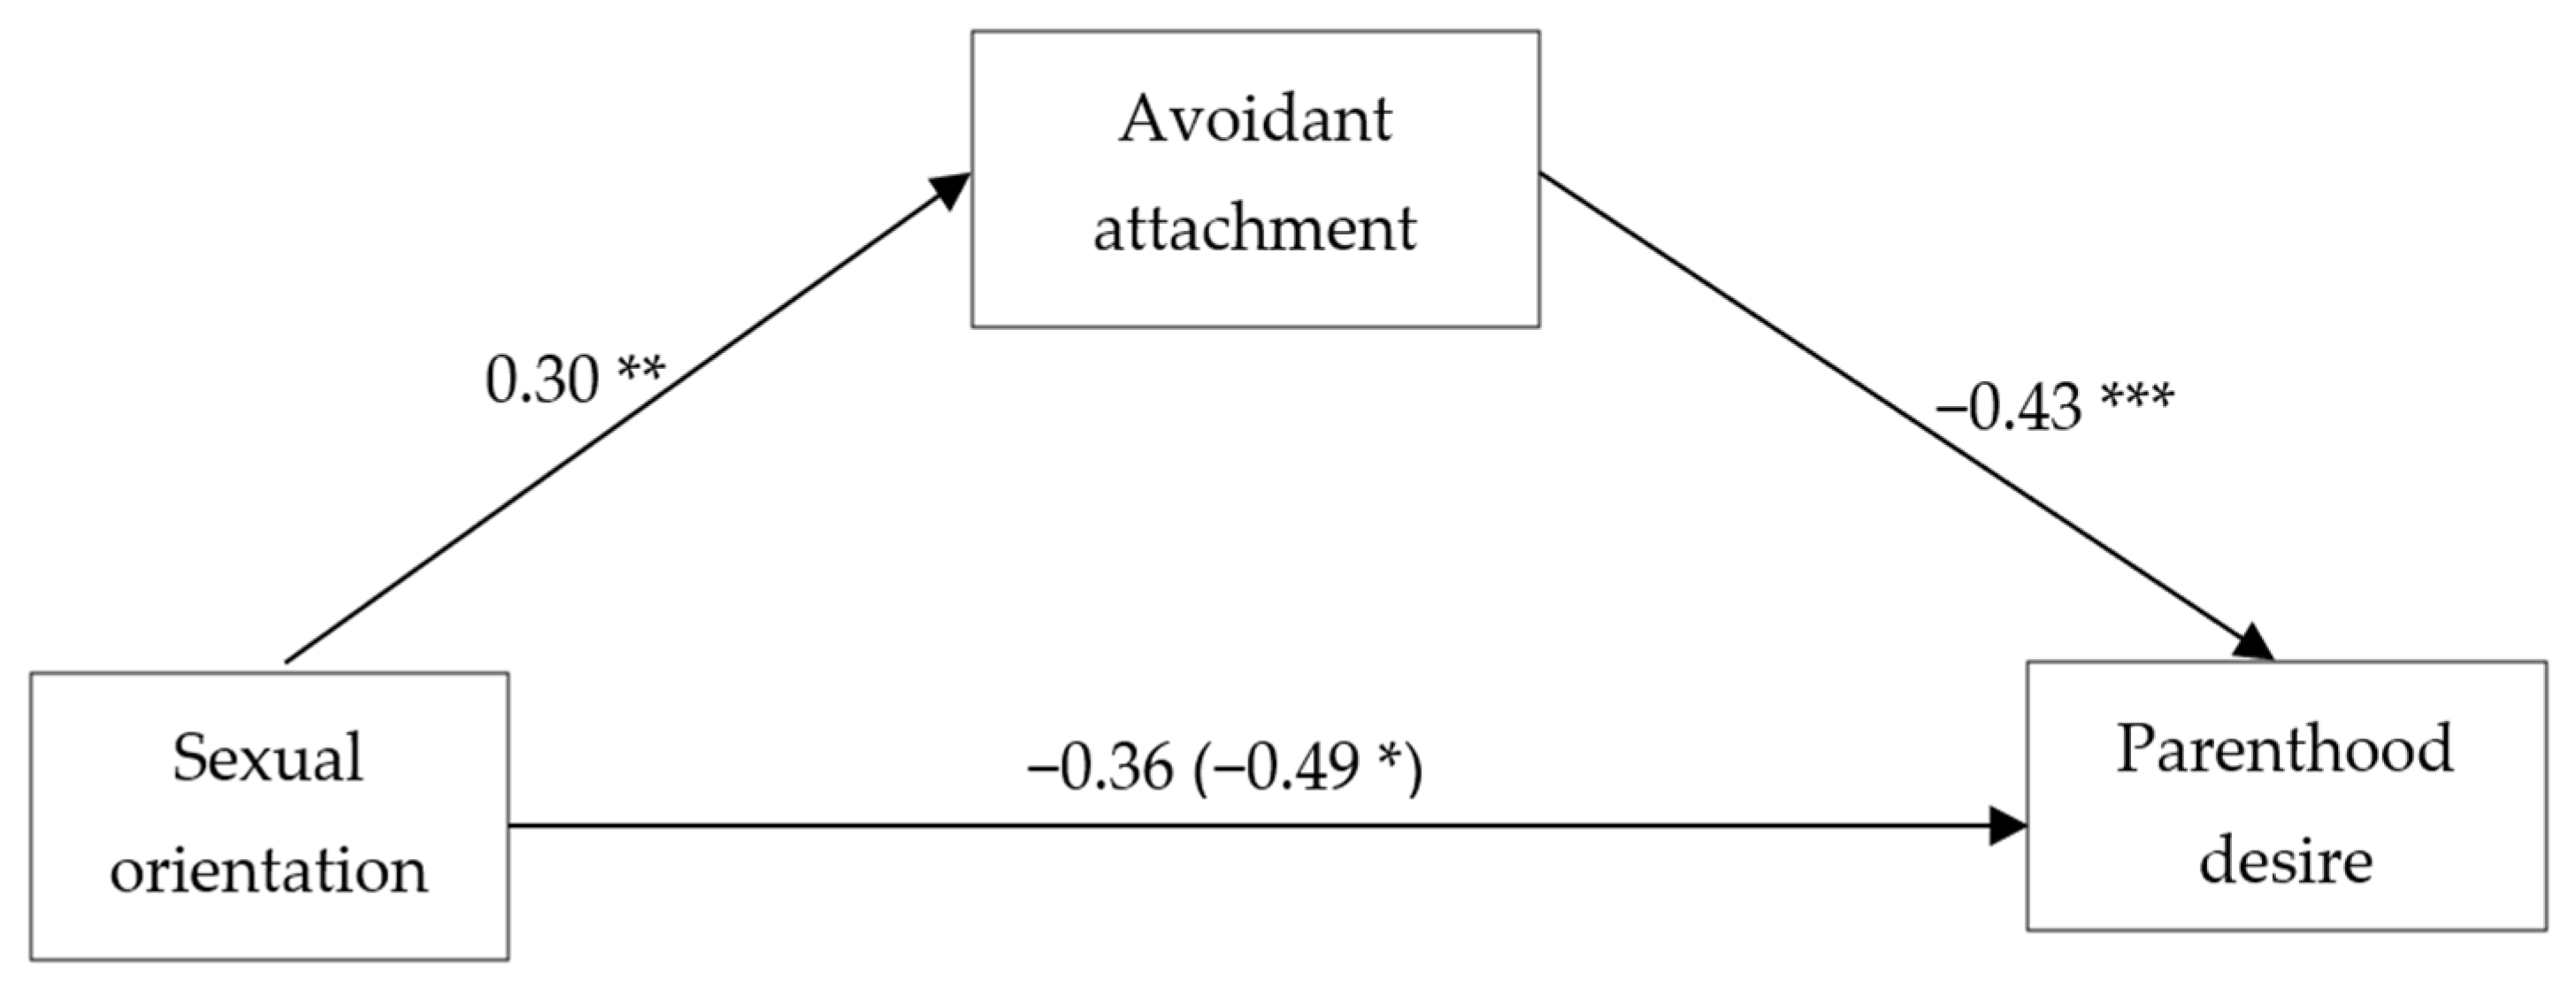 IJERPH Free Full-Text The Mediating Role of Insecure Attachment in the Gap in Parenthood Desire between Lesbian and Gay Individuals and Their Heterosexual Counterparts photo photo